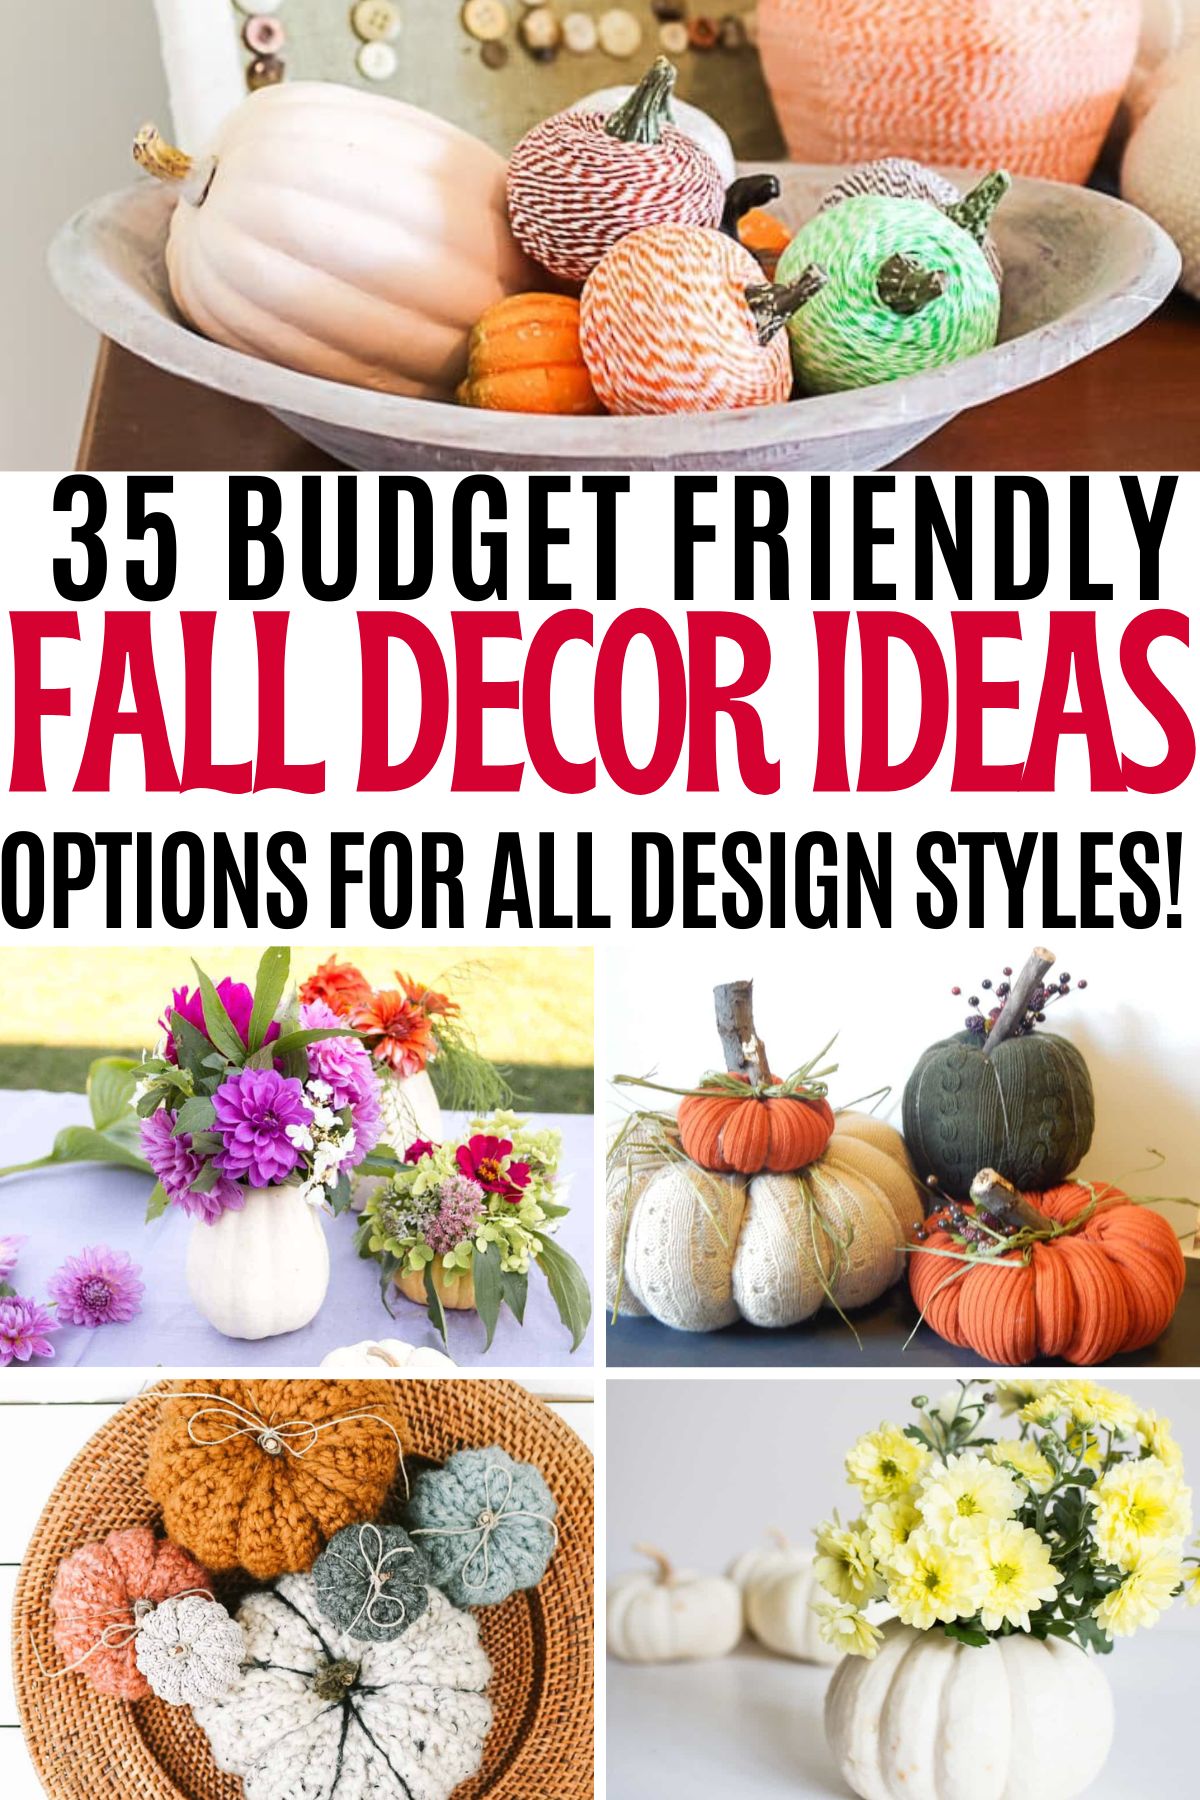 collage of fall decor, mostly pumpkins, with text overlay 35 budget friendly fall decor ideas options for all design styles.